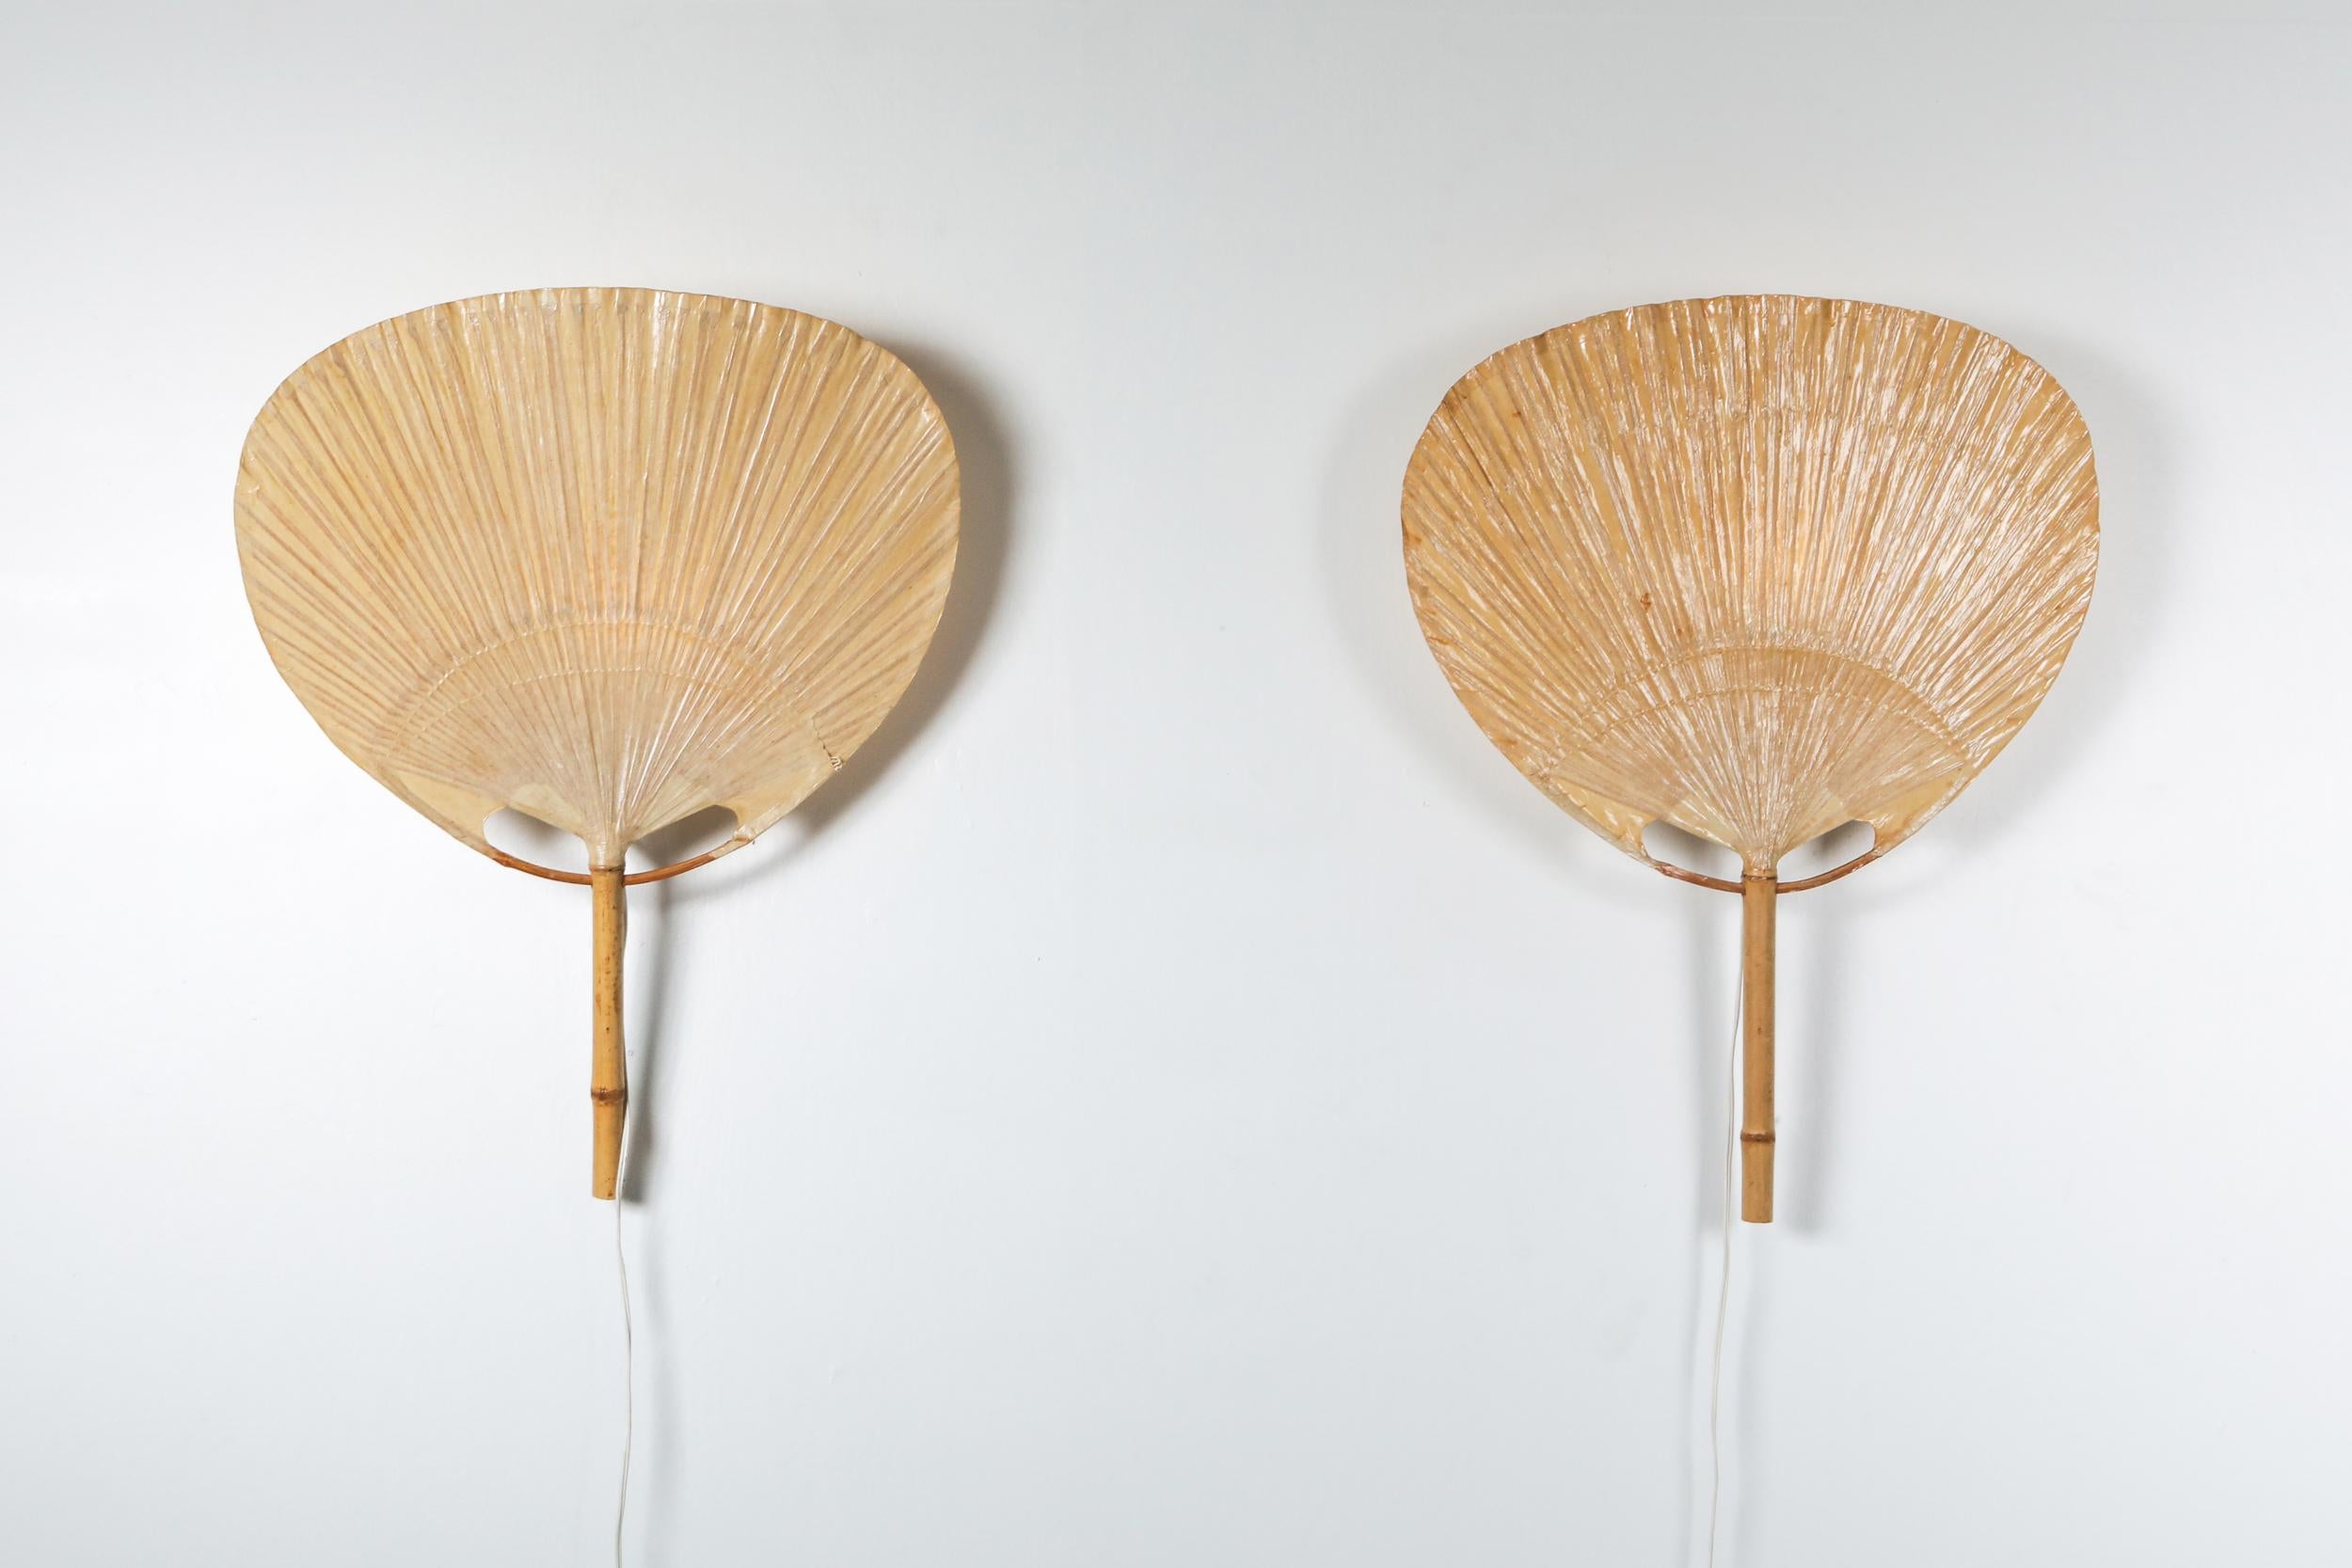 Uchiwa sconces by Ingo Maurer.

The lamps were handmade of bamboo and Japanese rice paper in 1977.
Ingo Maurer’s interest in paper for lampshades was linked with his interest in Japan. He produced various lamps from traditional Japanese fans